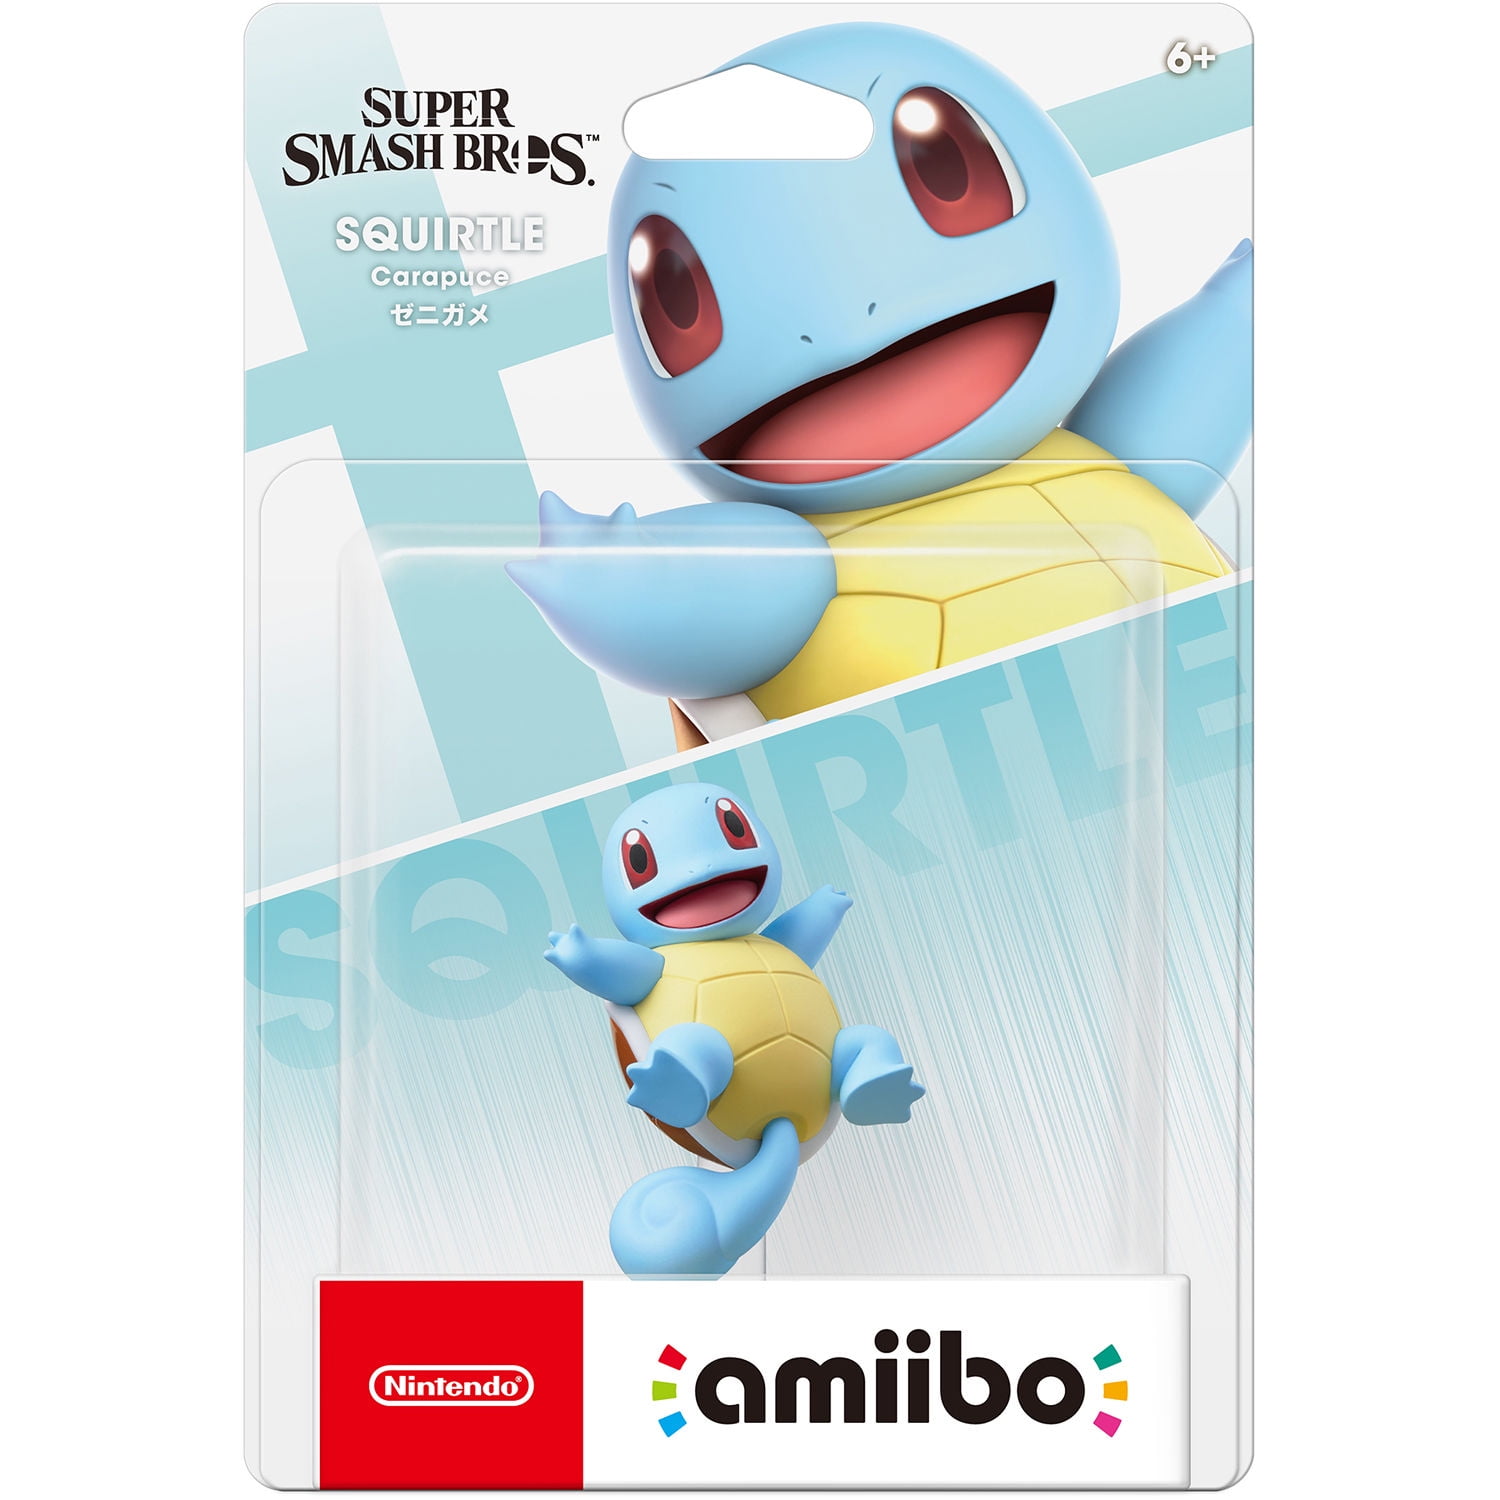 super smash bros ultimate squirtle world of light